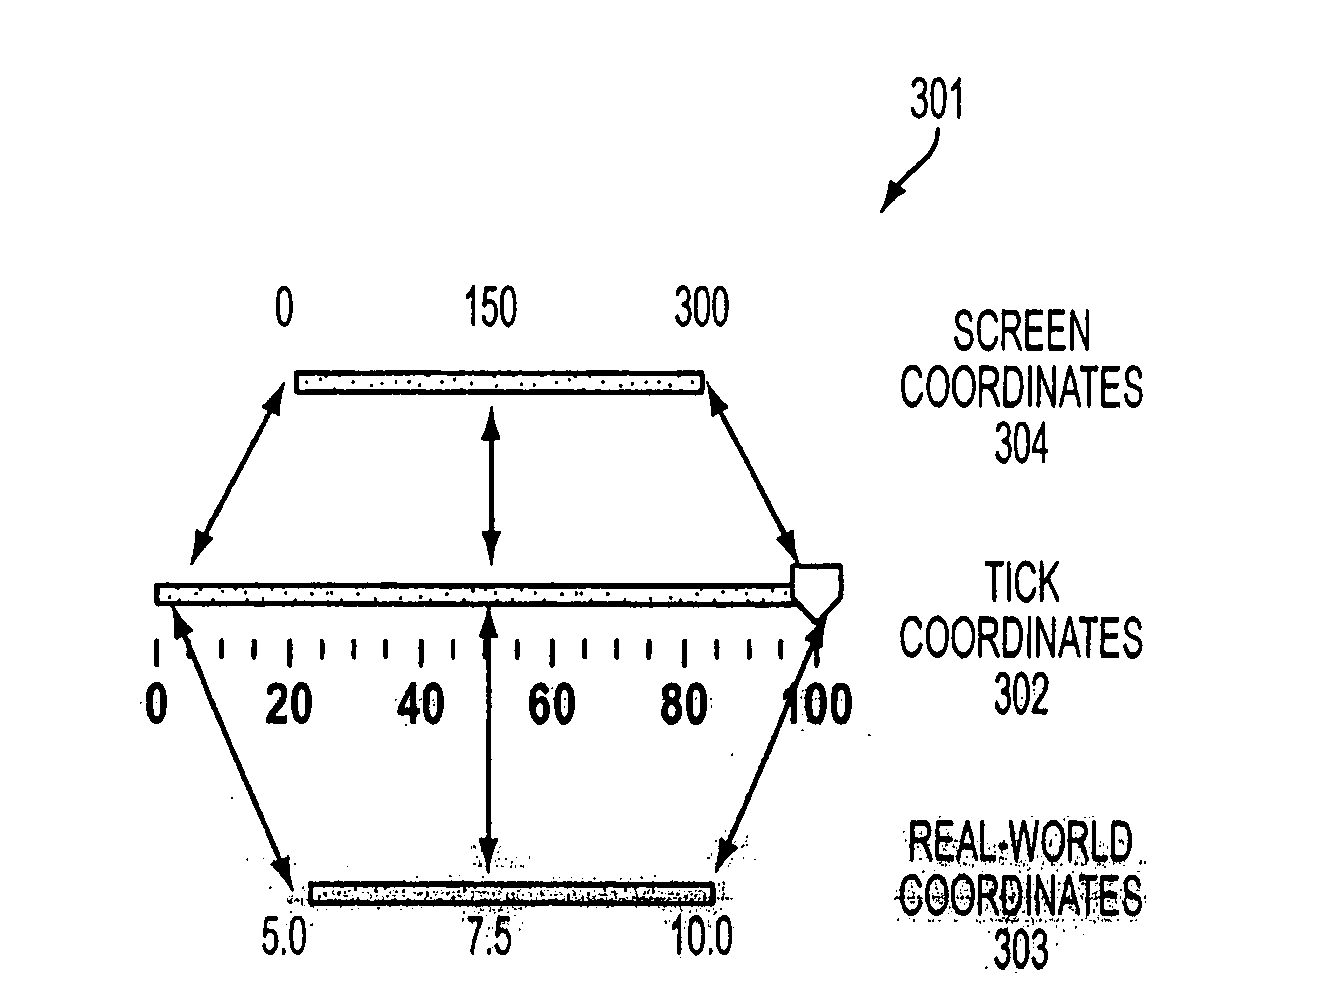 Method and apparatus for choosing ranges from a multi-range slider